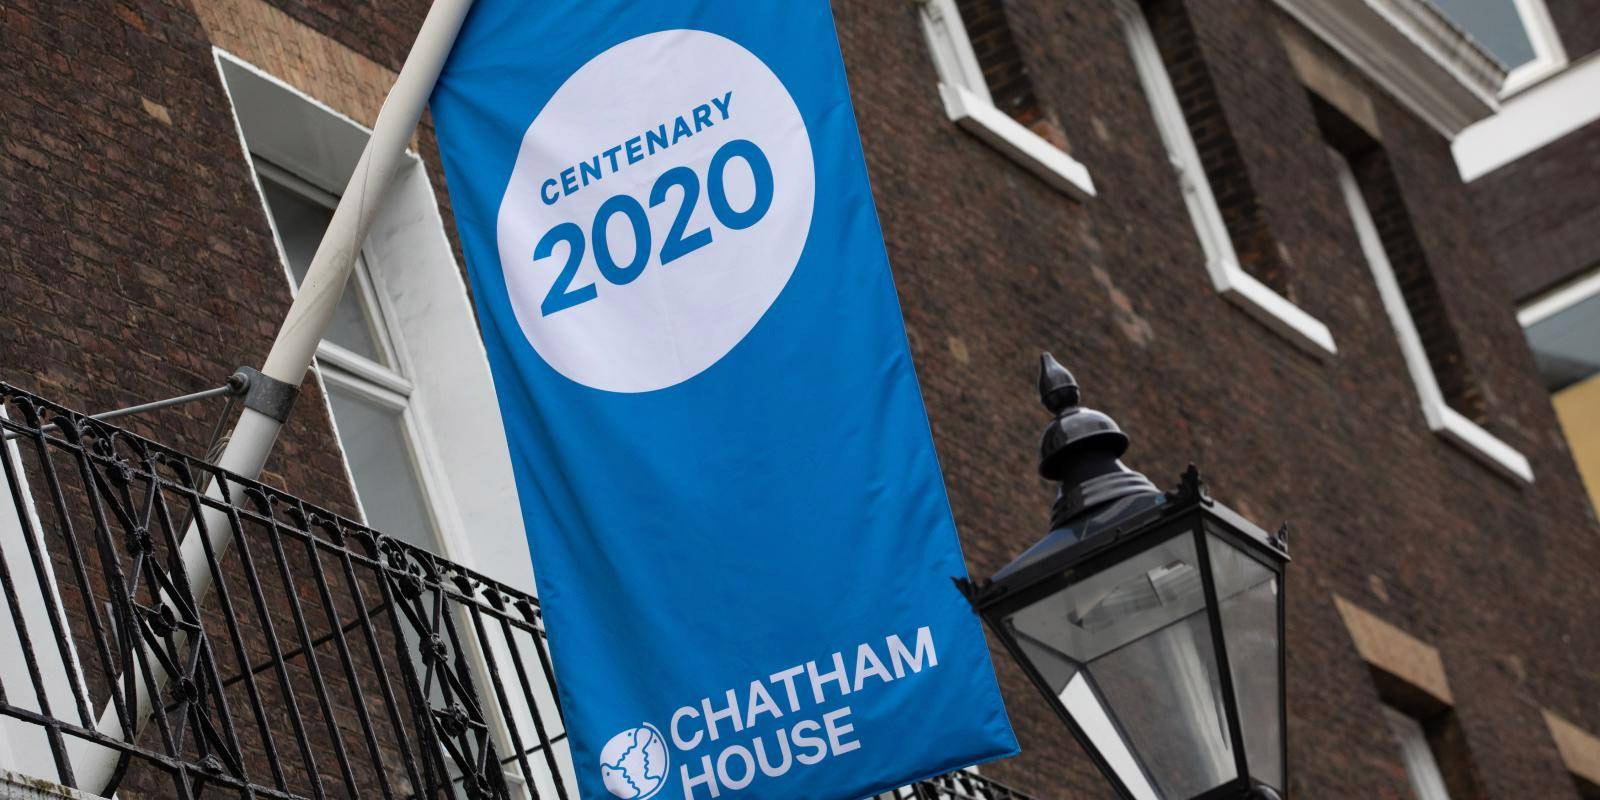 Chatham House - Independent Thinking Since 1920